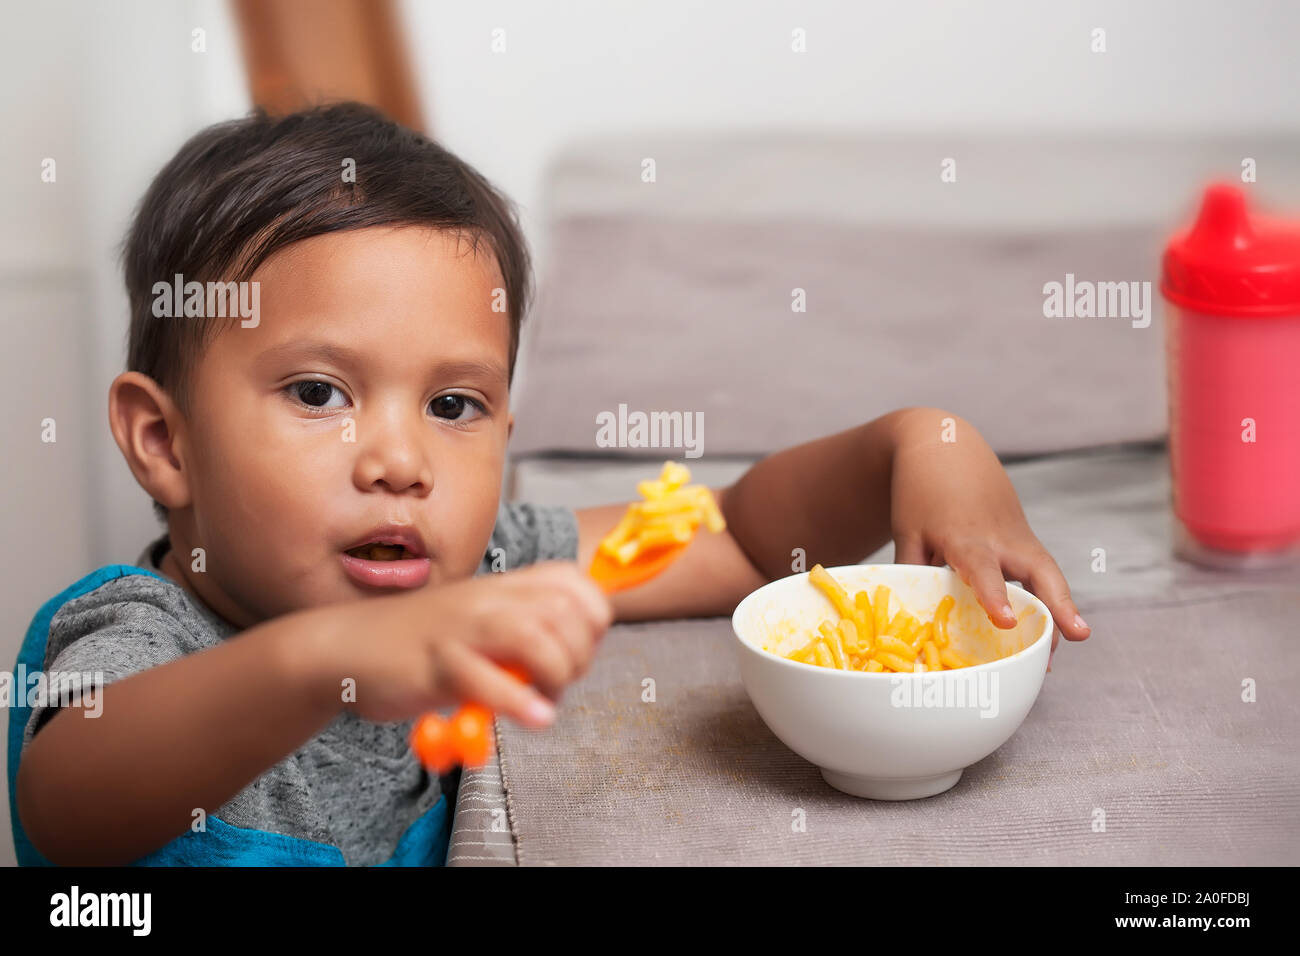 A preschool age boy shows ability to hold spoon full of macaroni and cheese to feed himself at the dinner table. Stock Photo